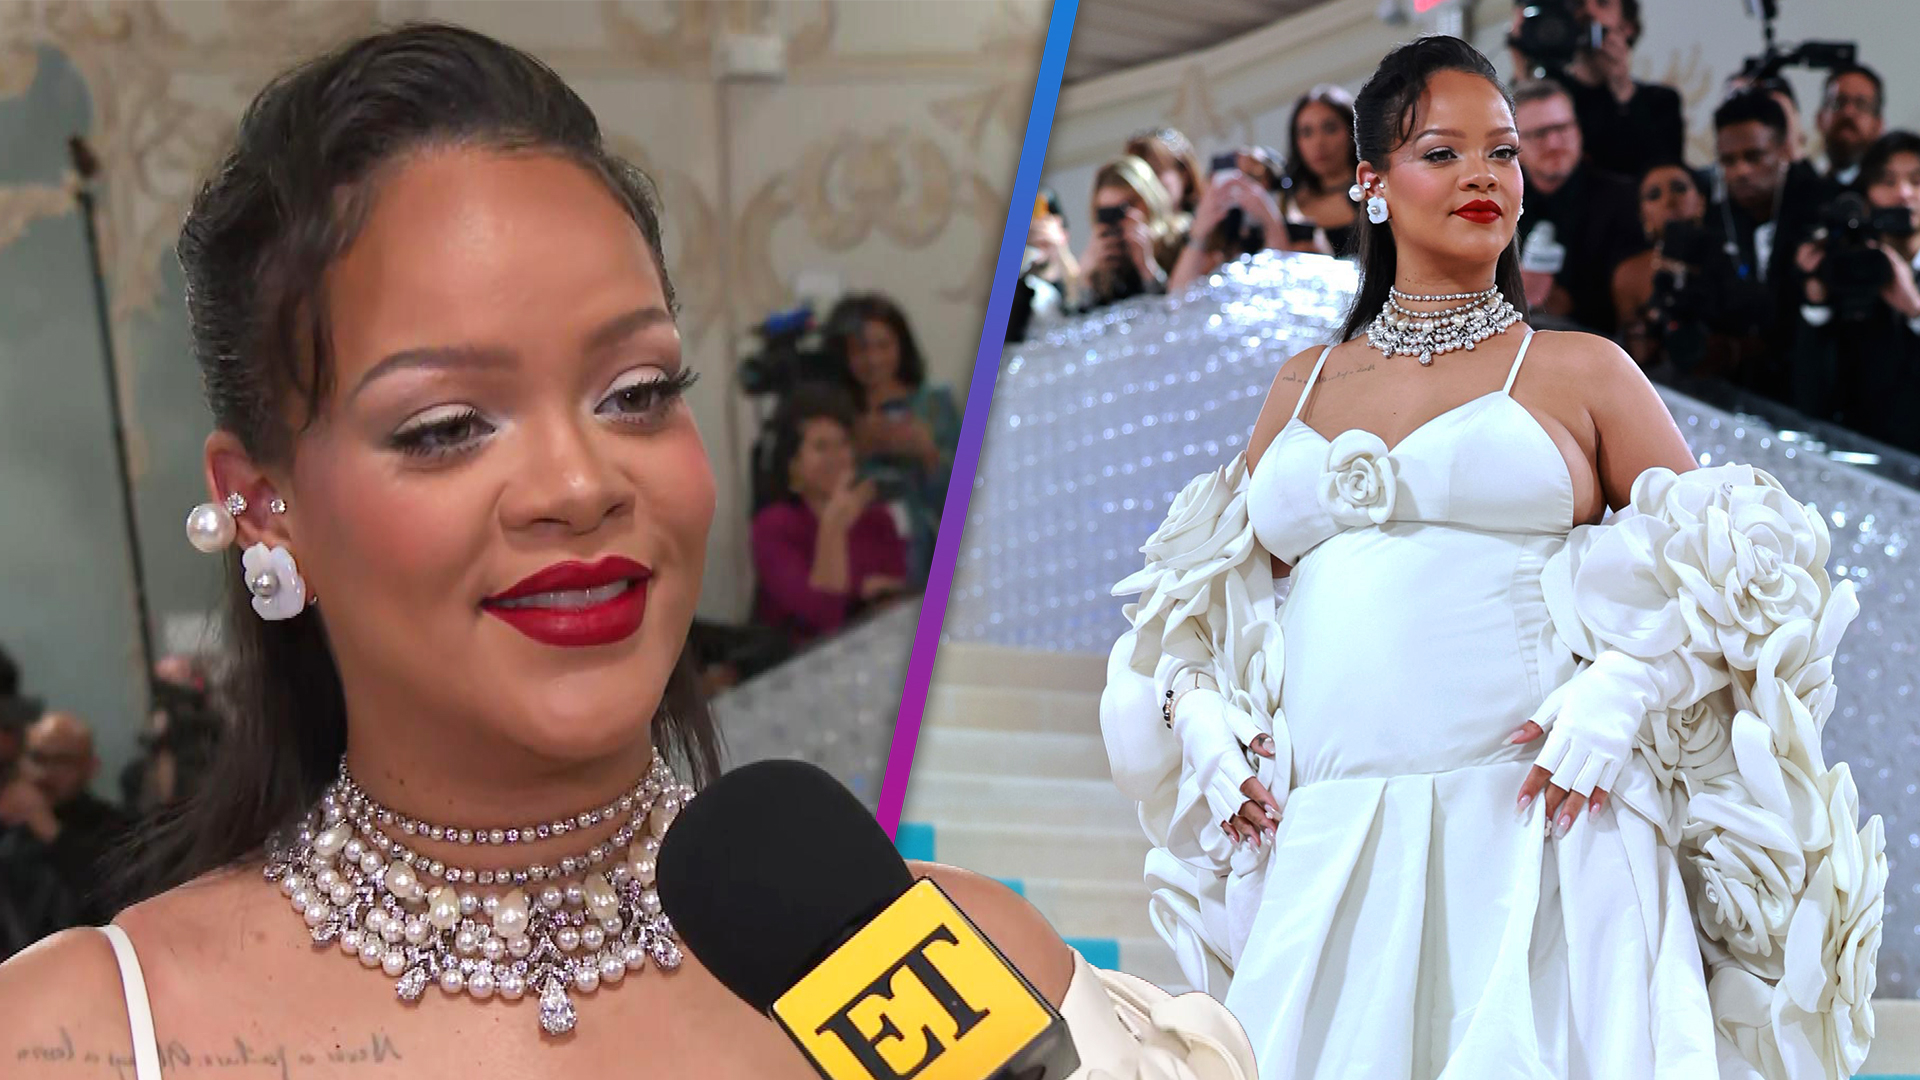 See Rihanna Have a Major Show-Stopping Moment With Her